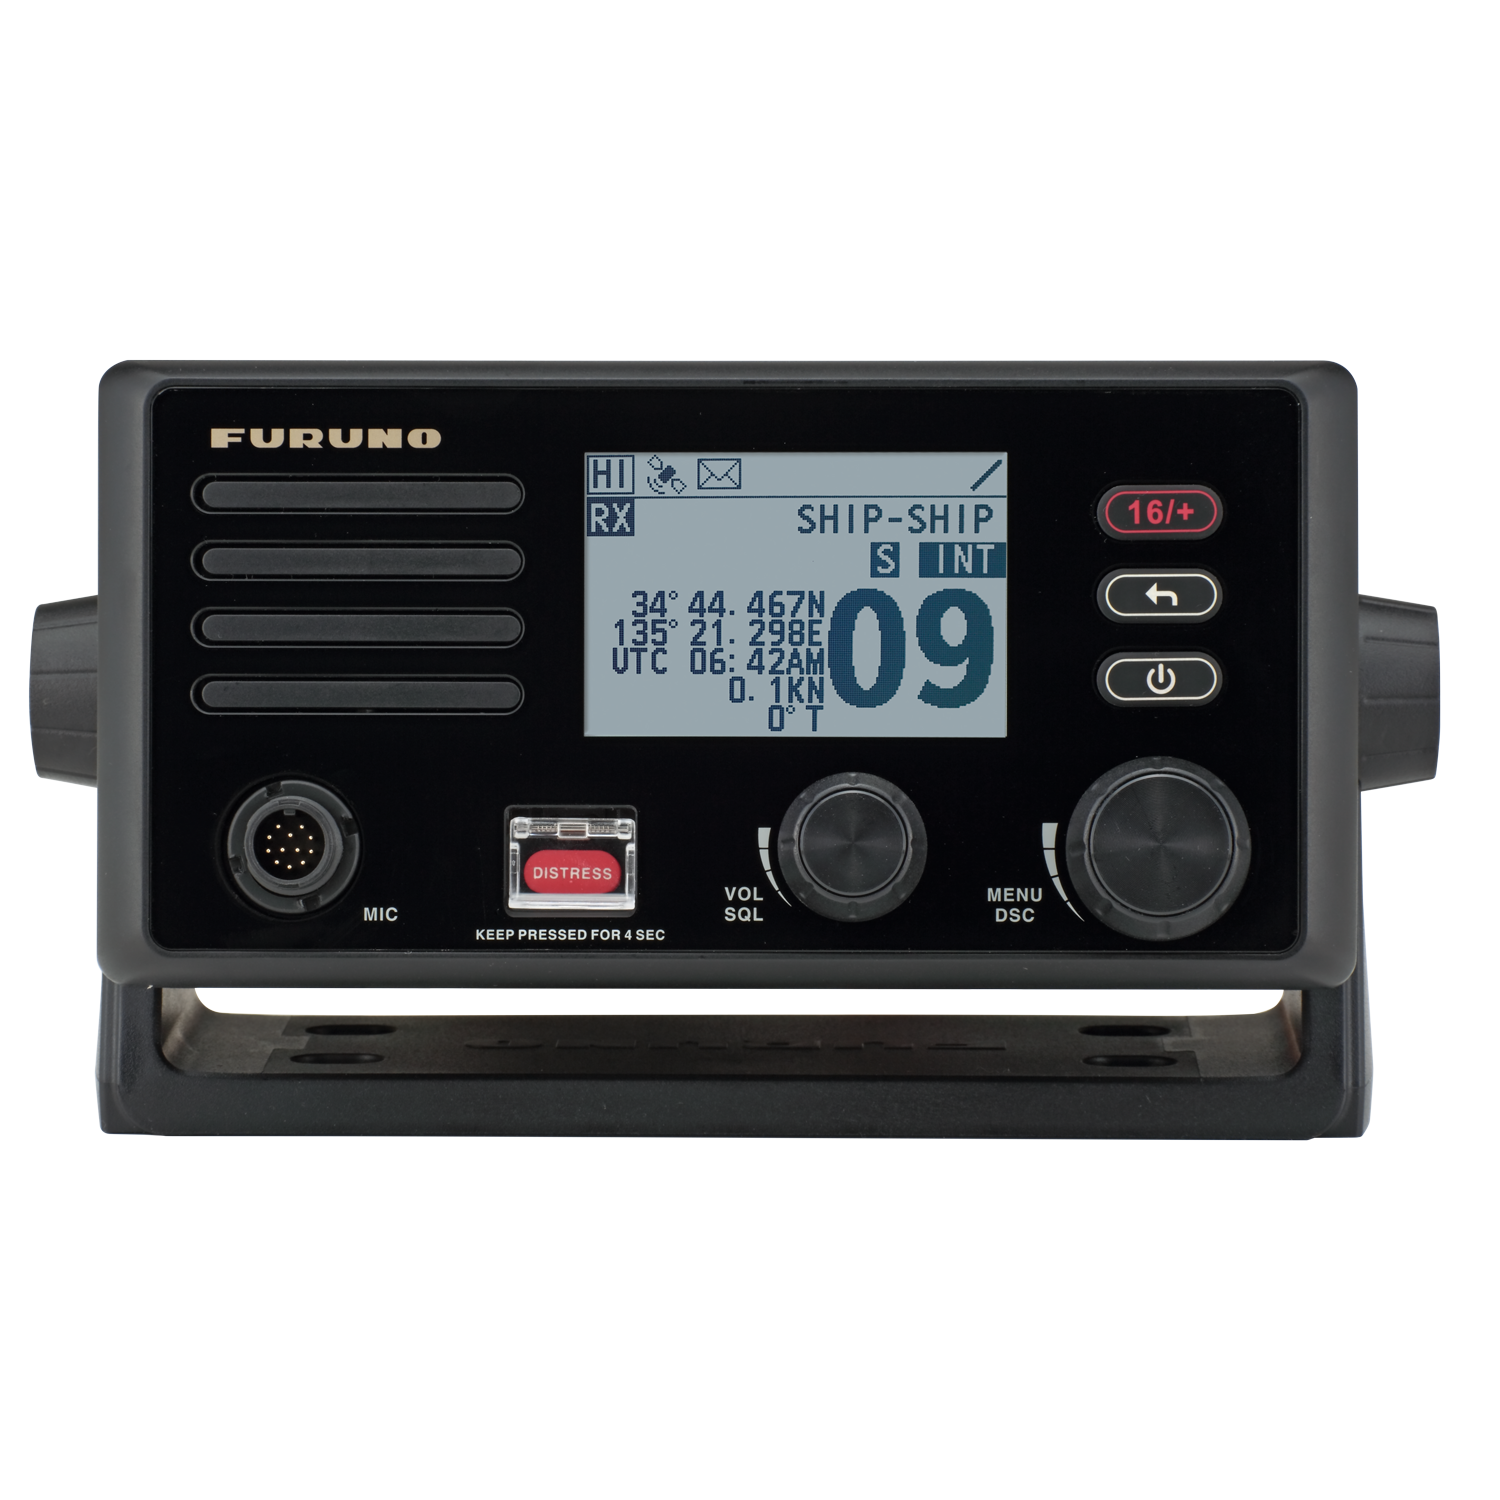 FM4800_front-no-mic.png